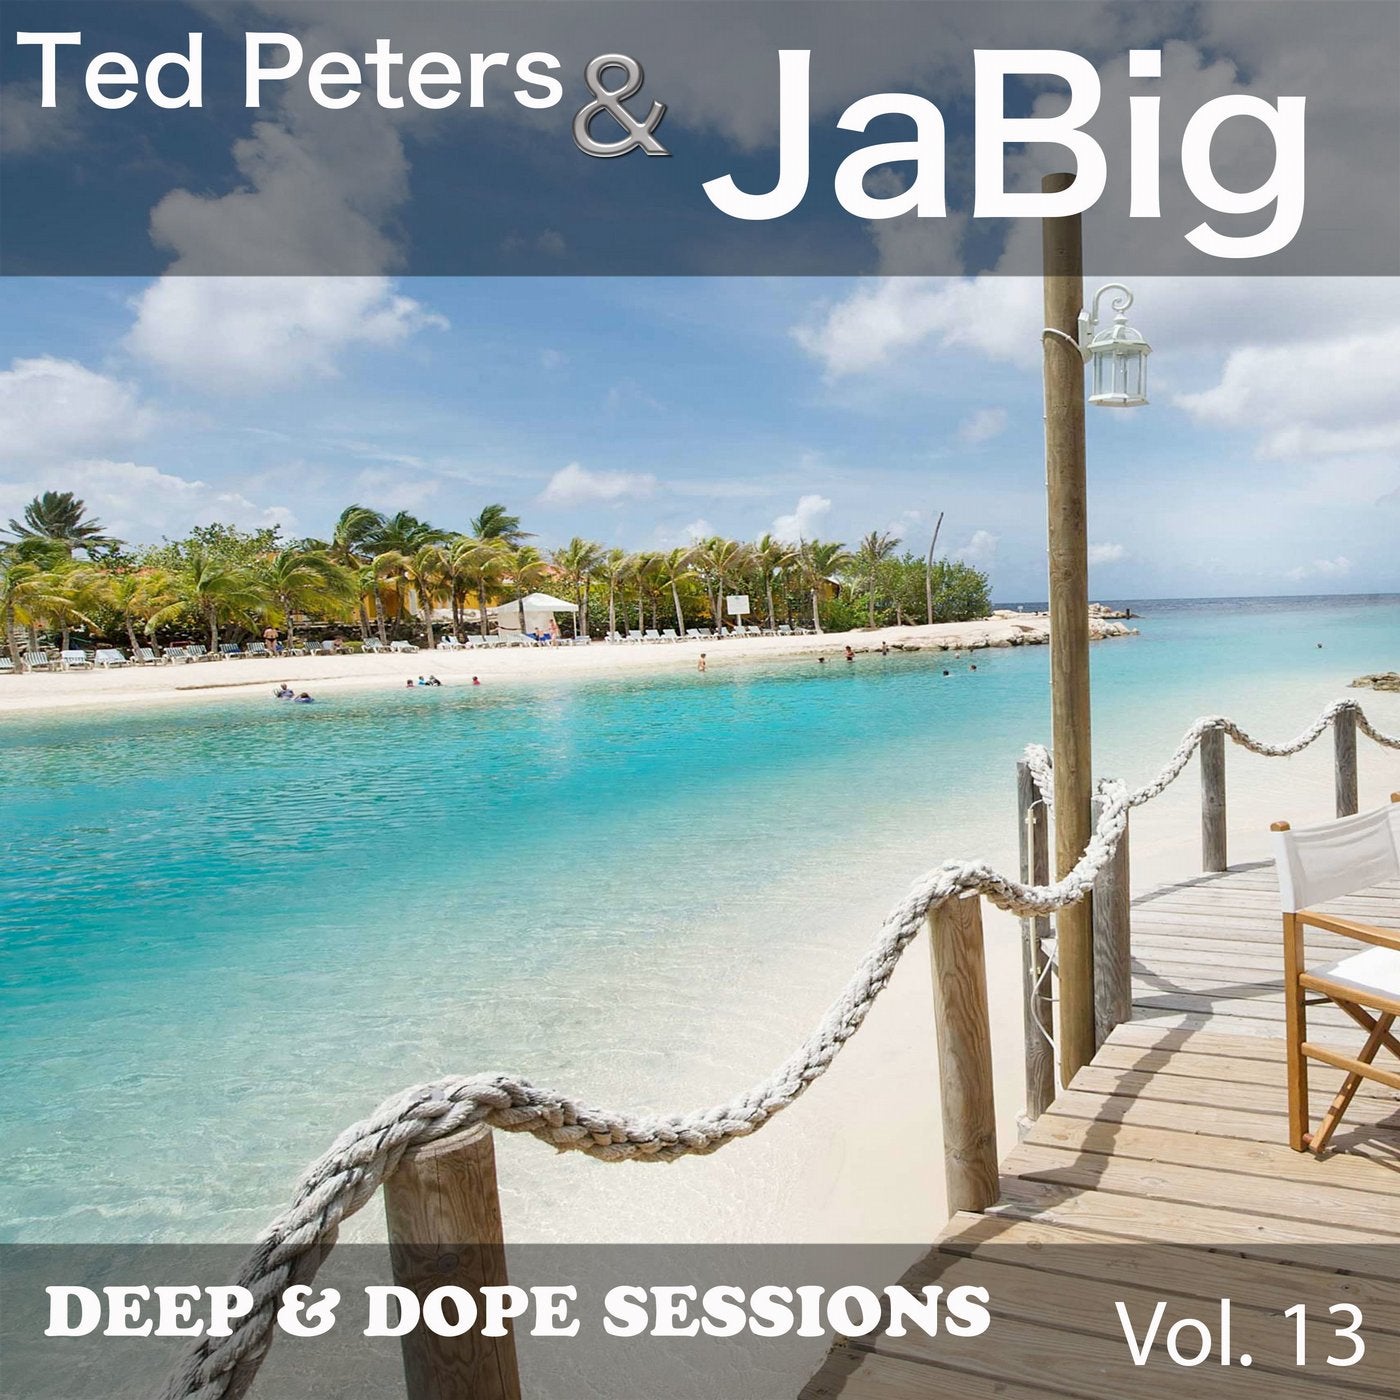 Deep & Dope Sessions, Vol. 13